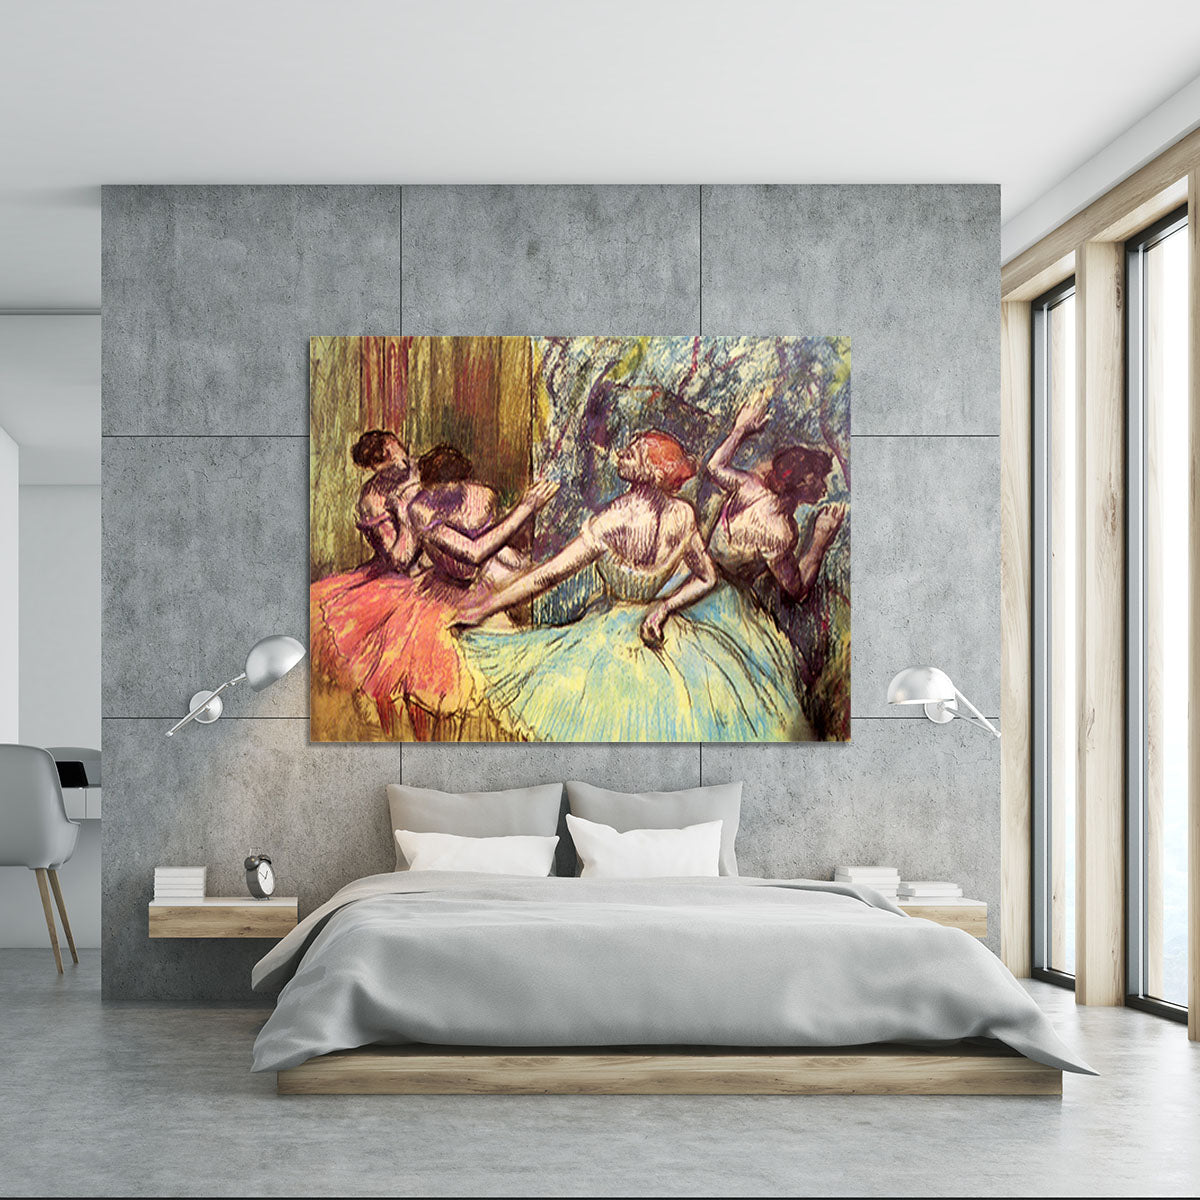 Four dancers behind the scenes 2 by Degas Canvas Print or Poster - Canvas Art Rocks - 5